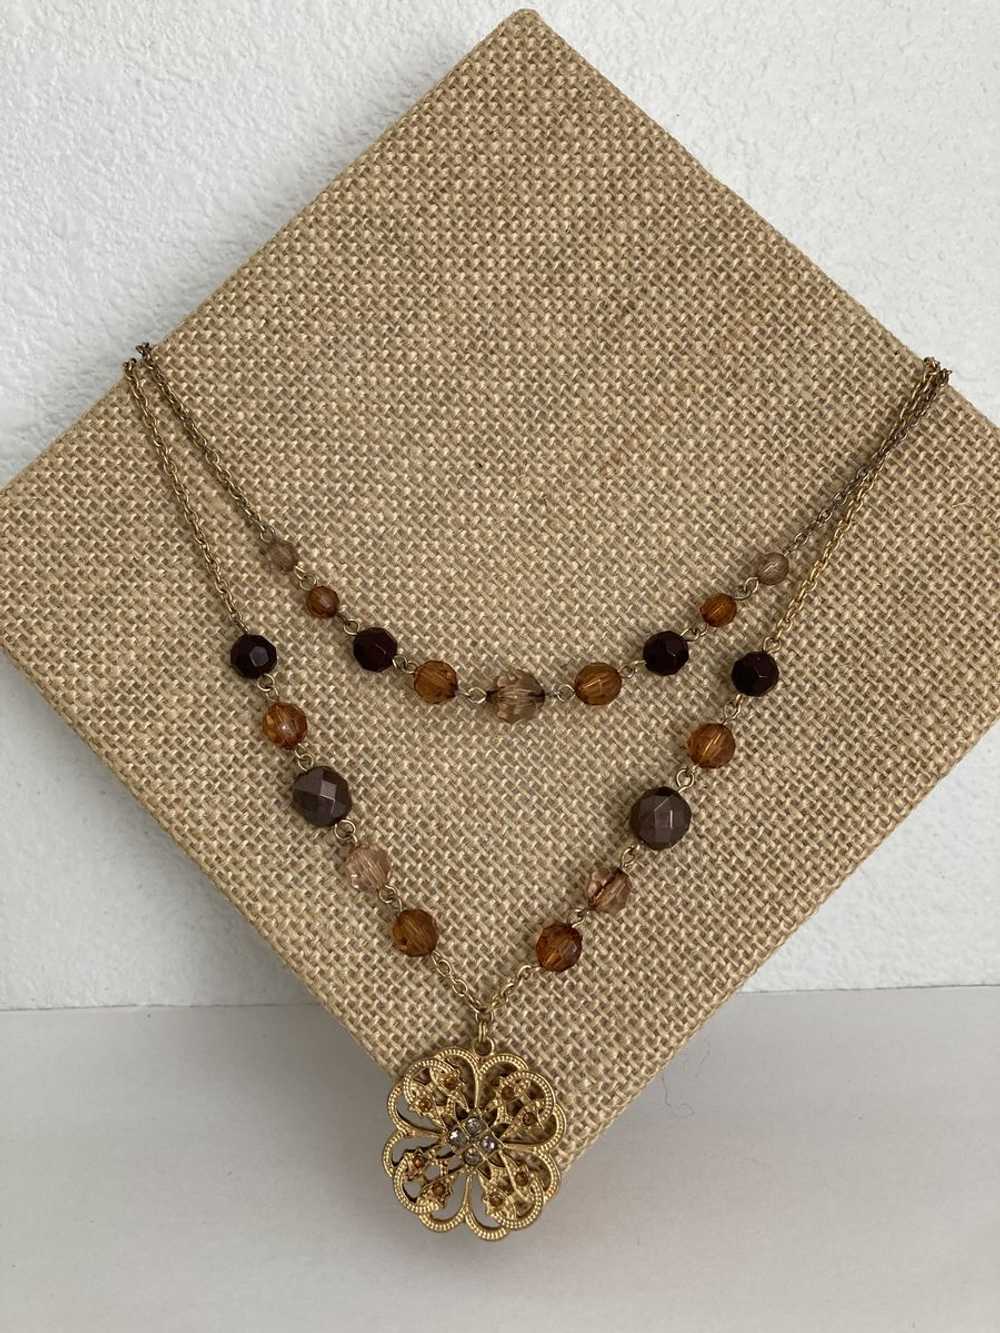 Double Layer Necklace Brown Beads Gold Tone Penda… - image 1